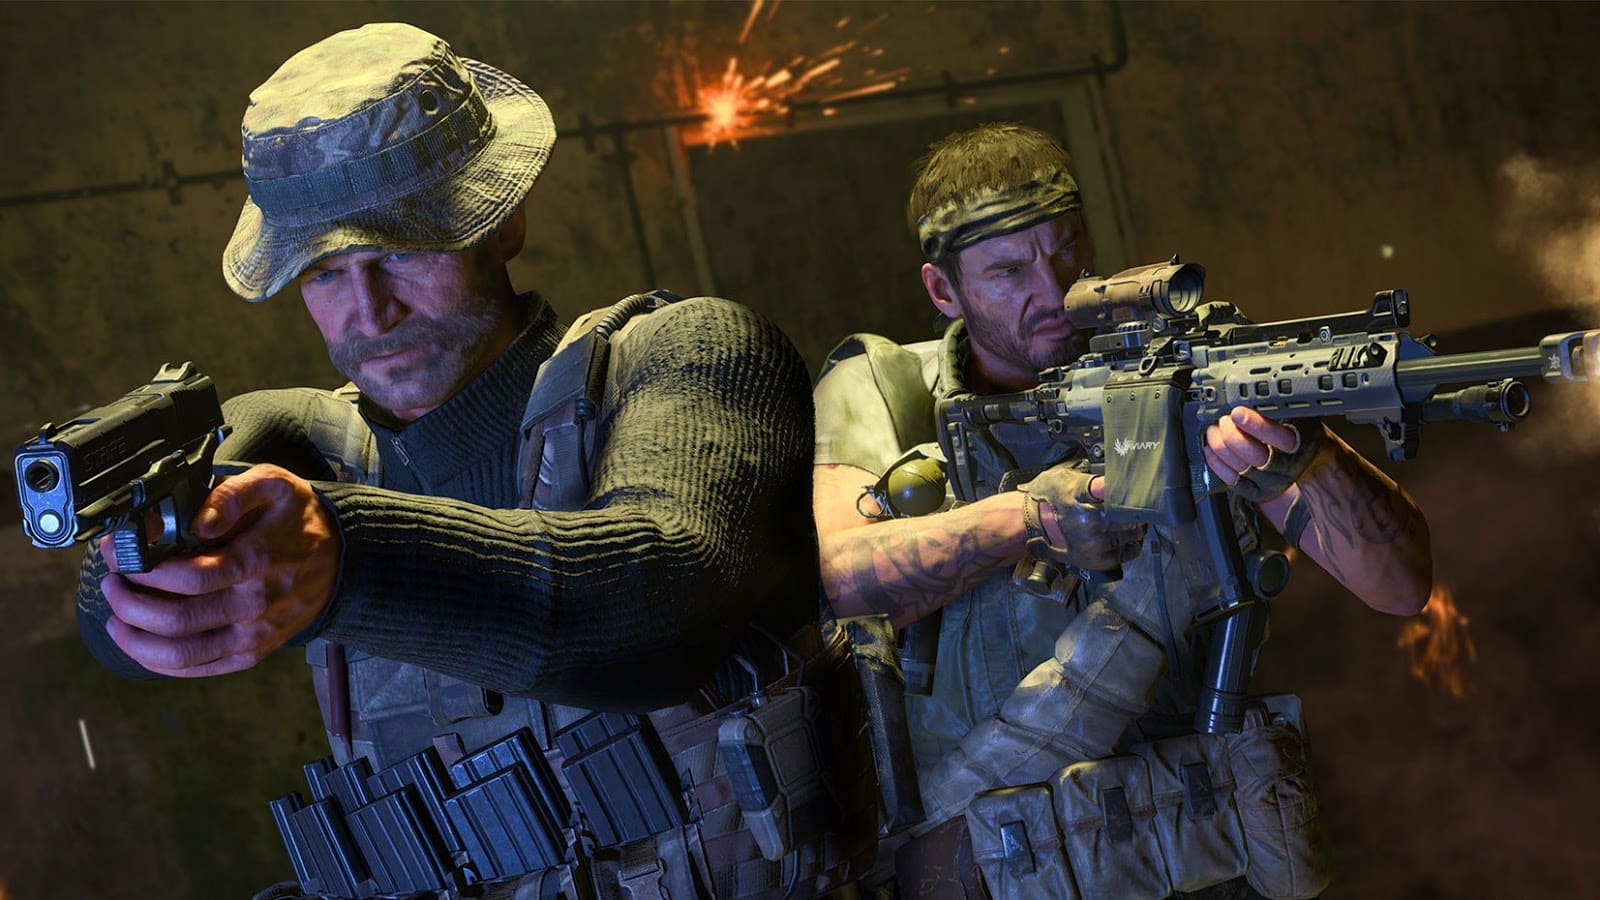 Sgt. Frank Woods Could Be Coming to Modern Warfare in a Black Ops